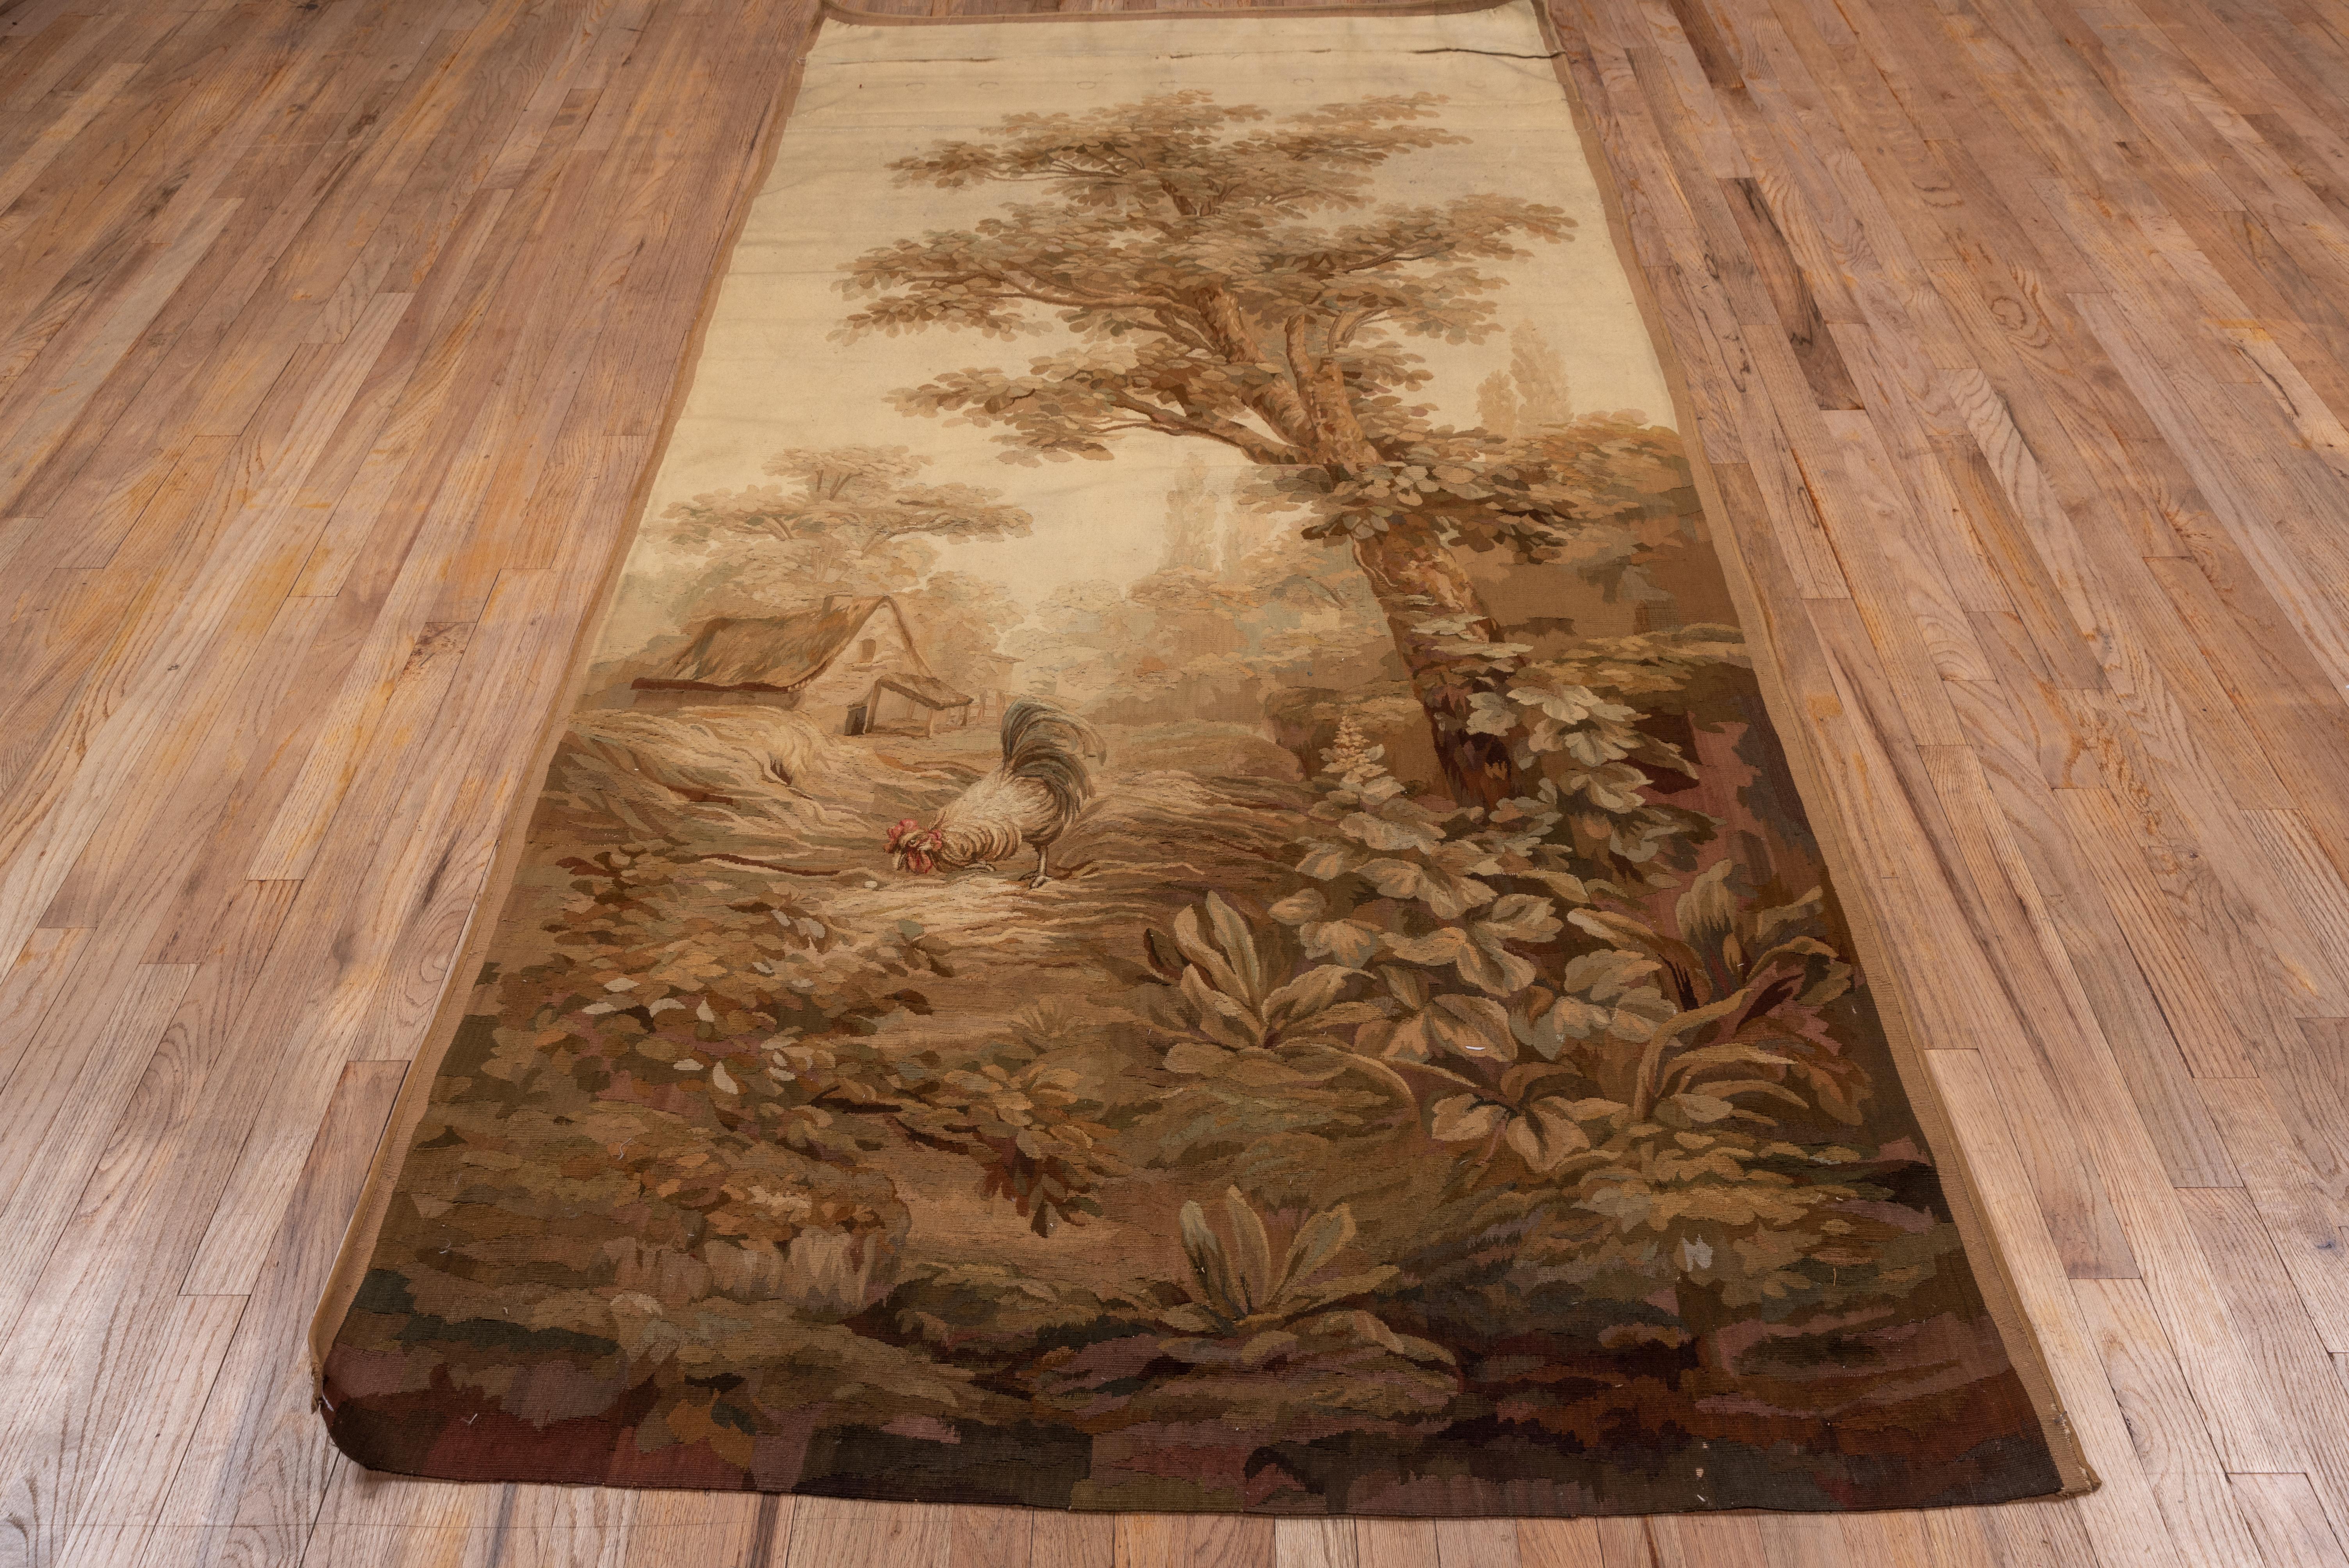 In an 18th century Verdure style, but 19th century in origin Beauvais tapestry work. A tall tree shades a farmhouse yard with foreground wild plants, a pecking chicken and a rustic dwelling behind. Hazy summer aerial perspective. No borders.